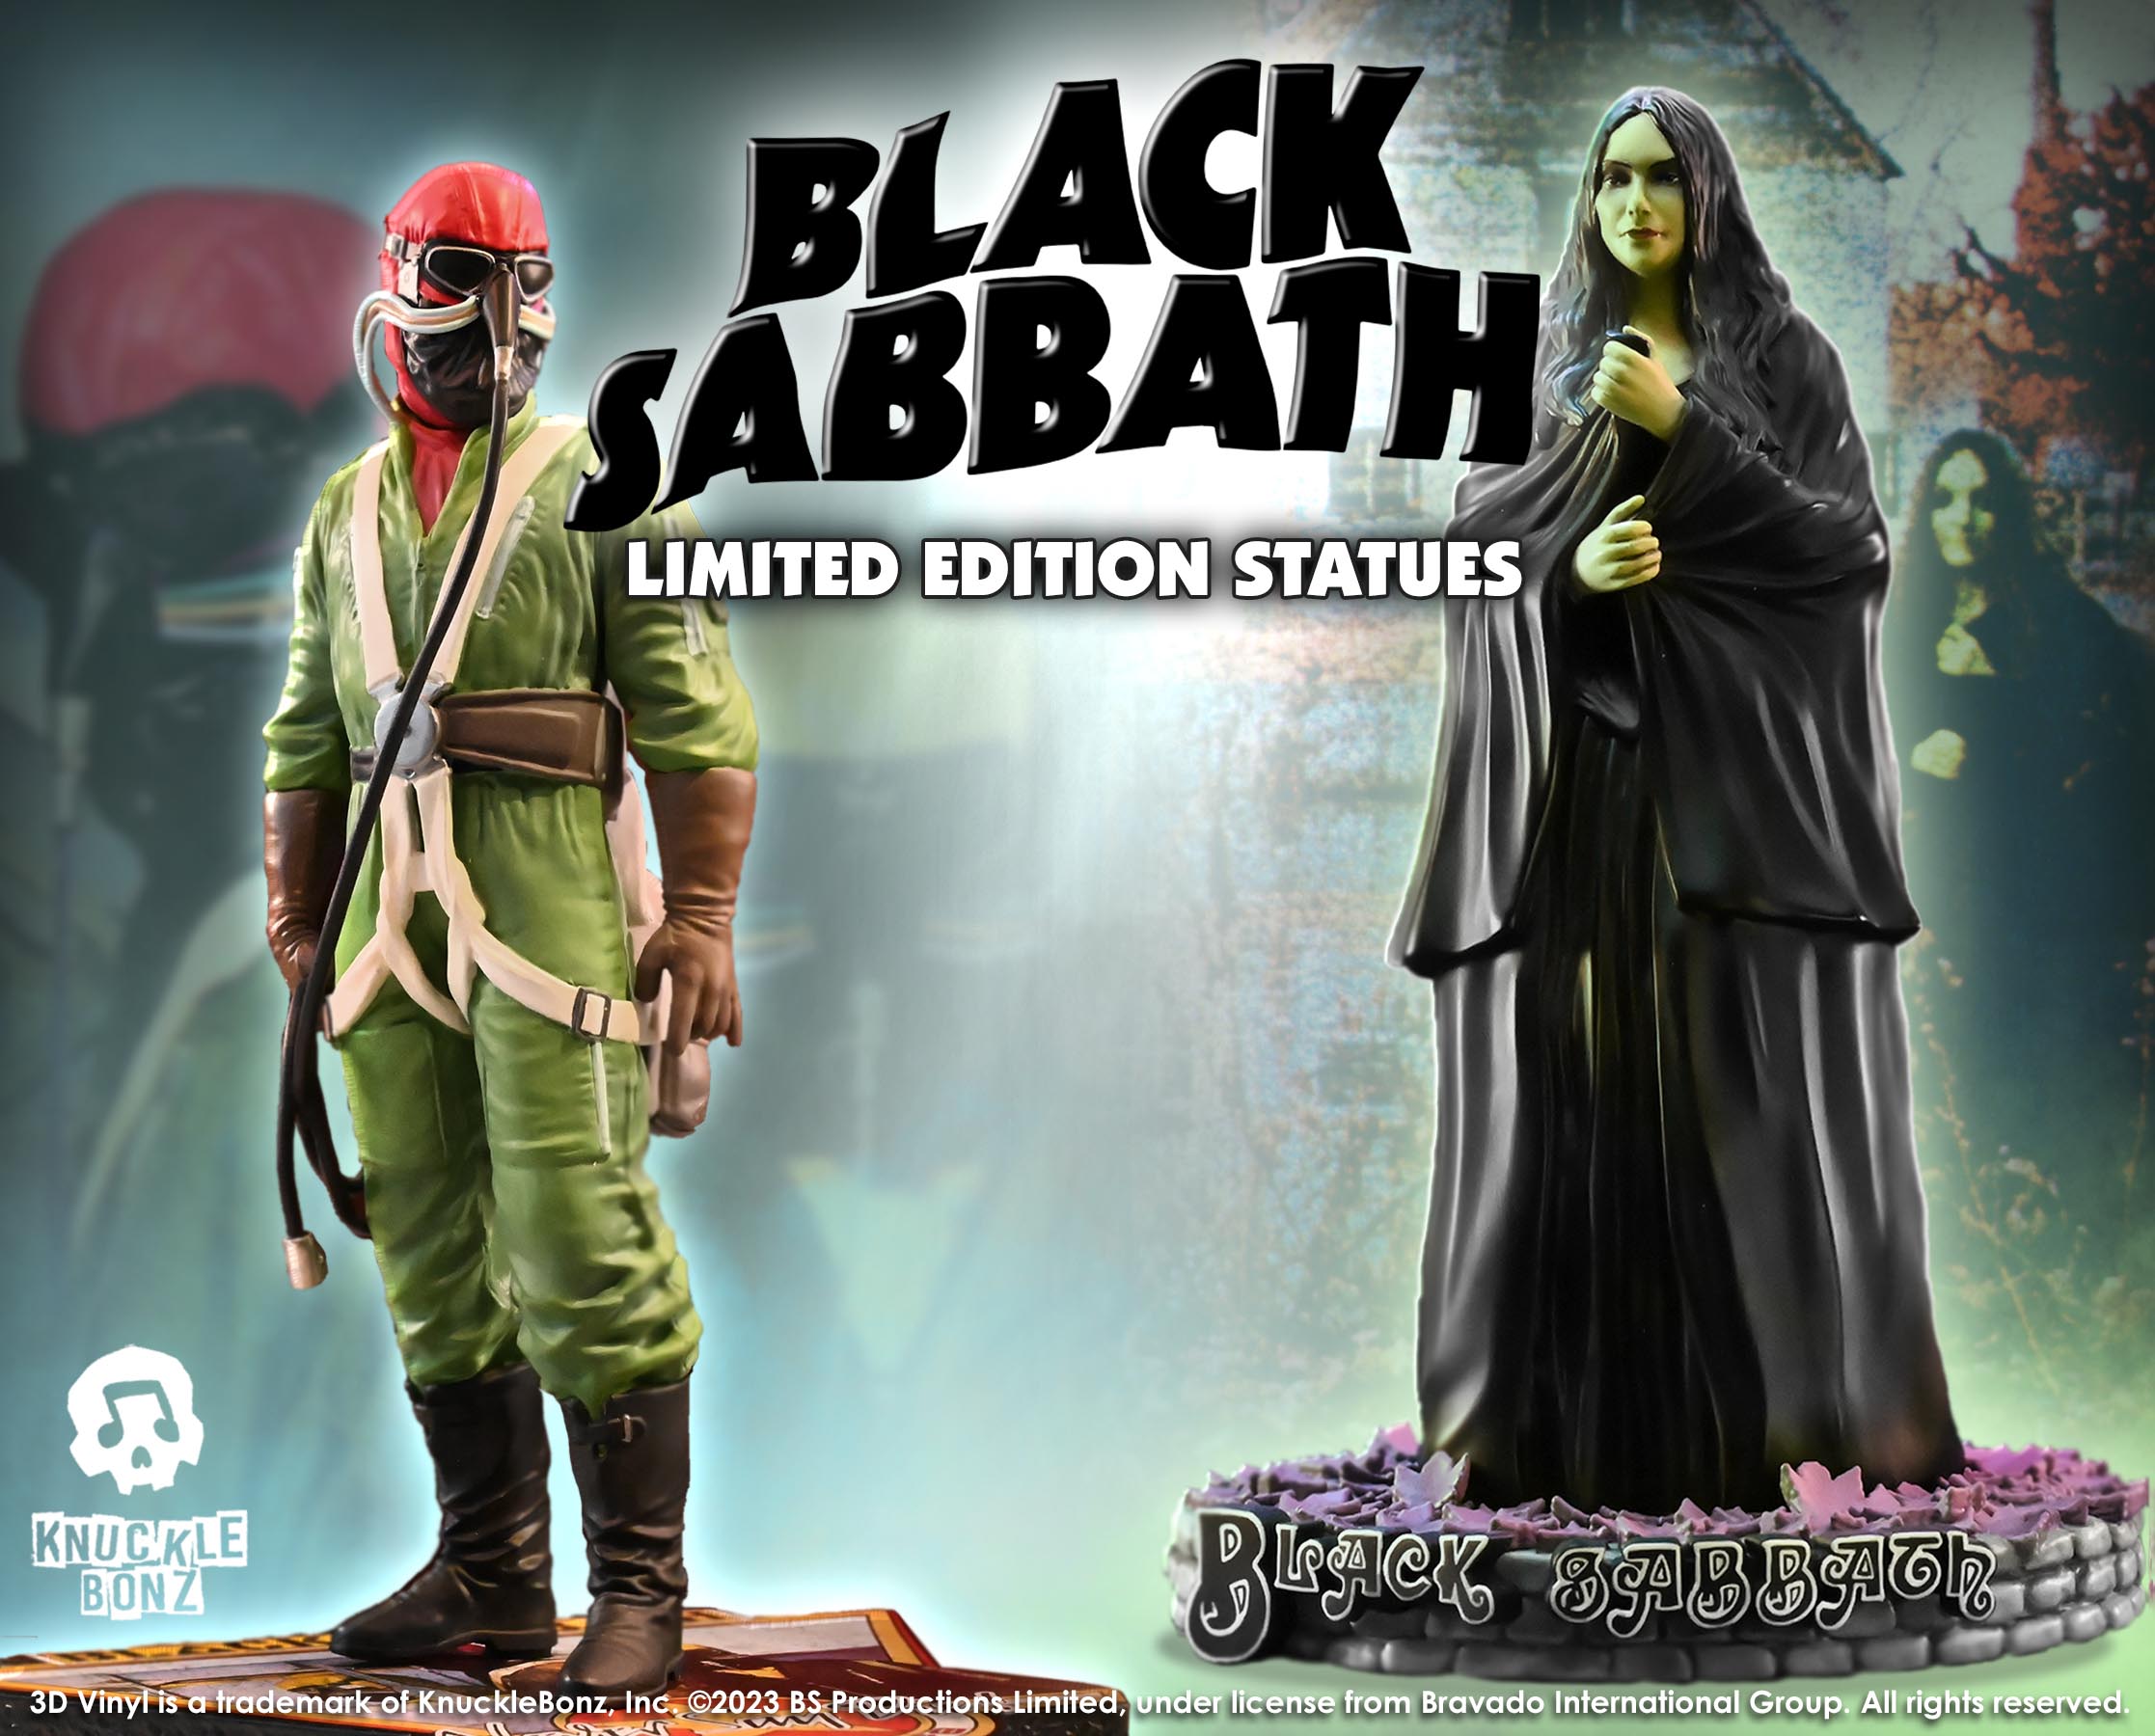 The Black Sabbath (Witch) and the Never Say Die (Pilot) 3D Vinyl® collectible statues by KnuckleBonz® are currently in Production, Ships Fall 2023